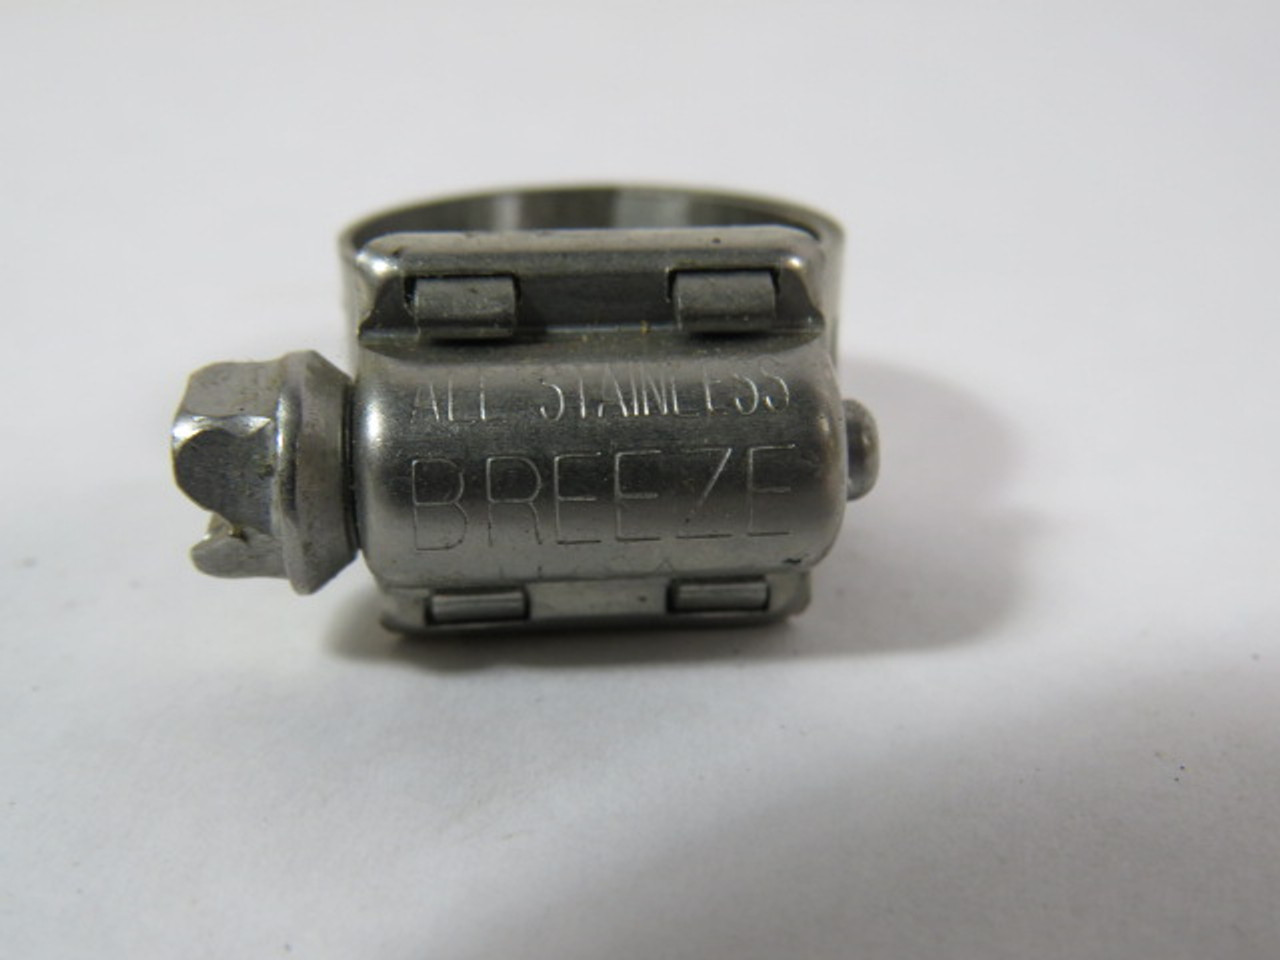 Breeze 64008 General Purpose Industrial Clamp 13-23mm USED